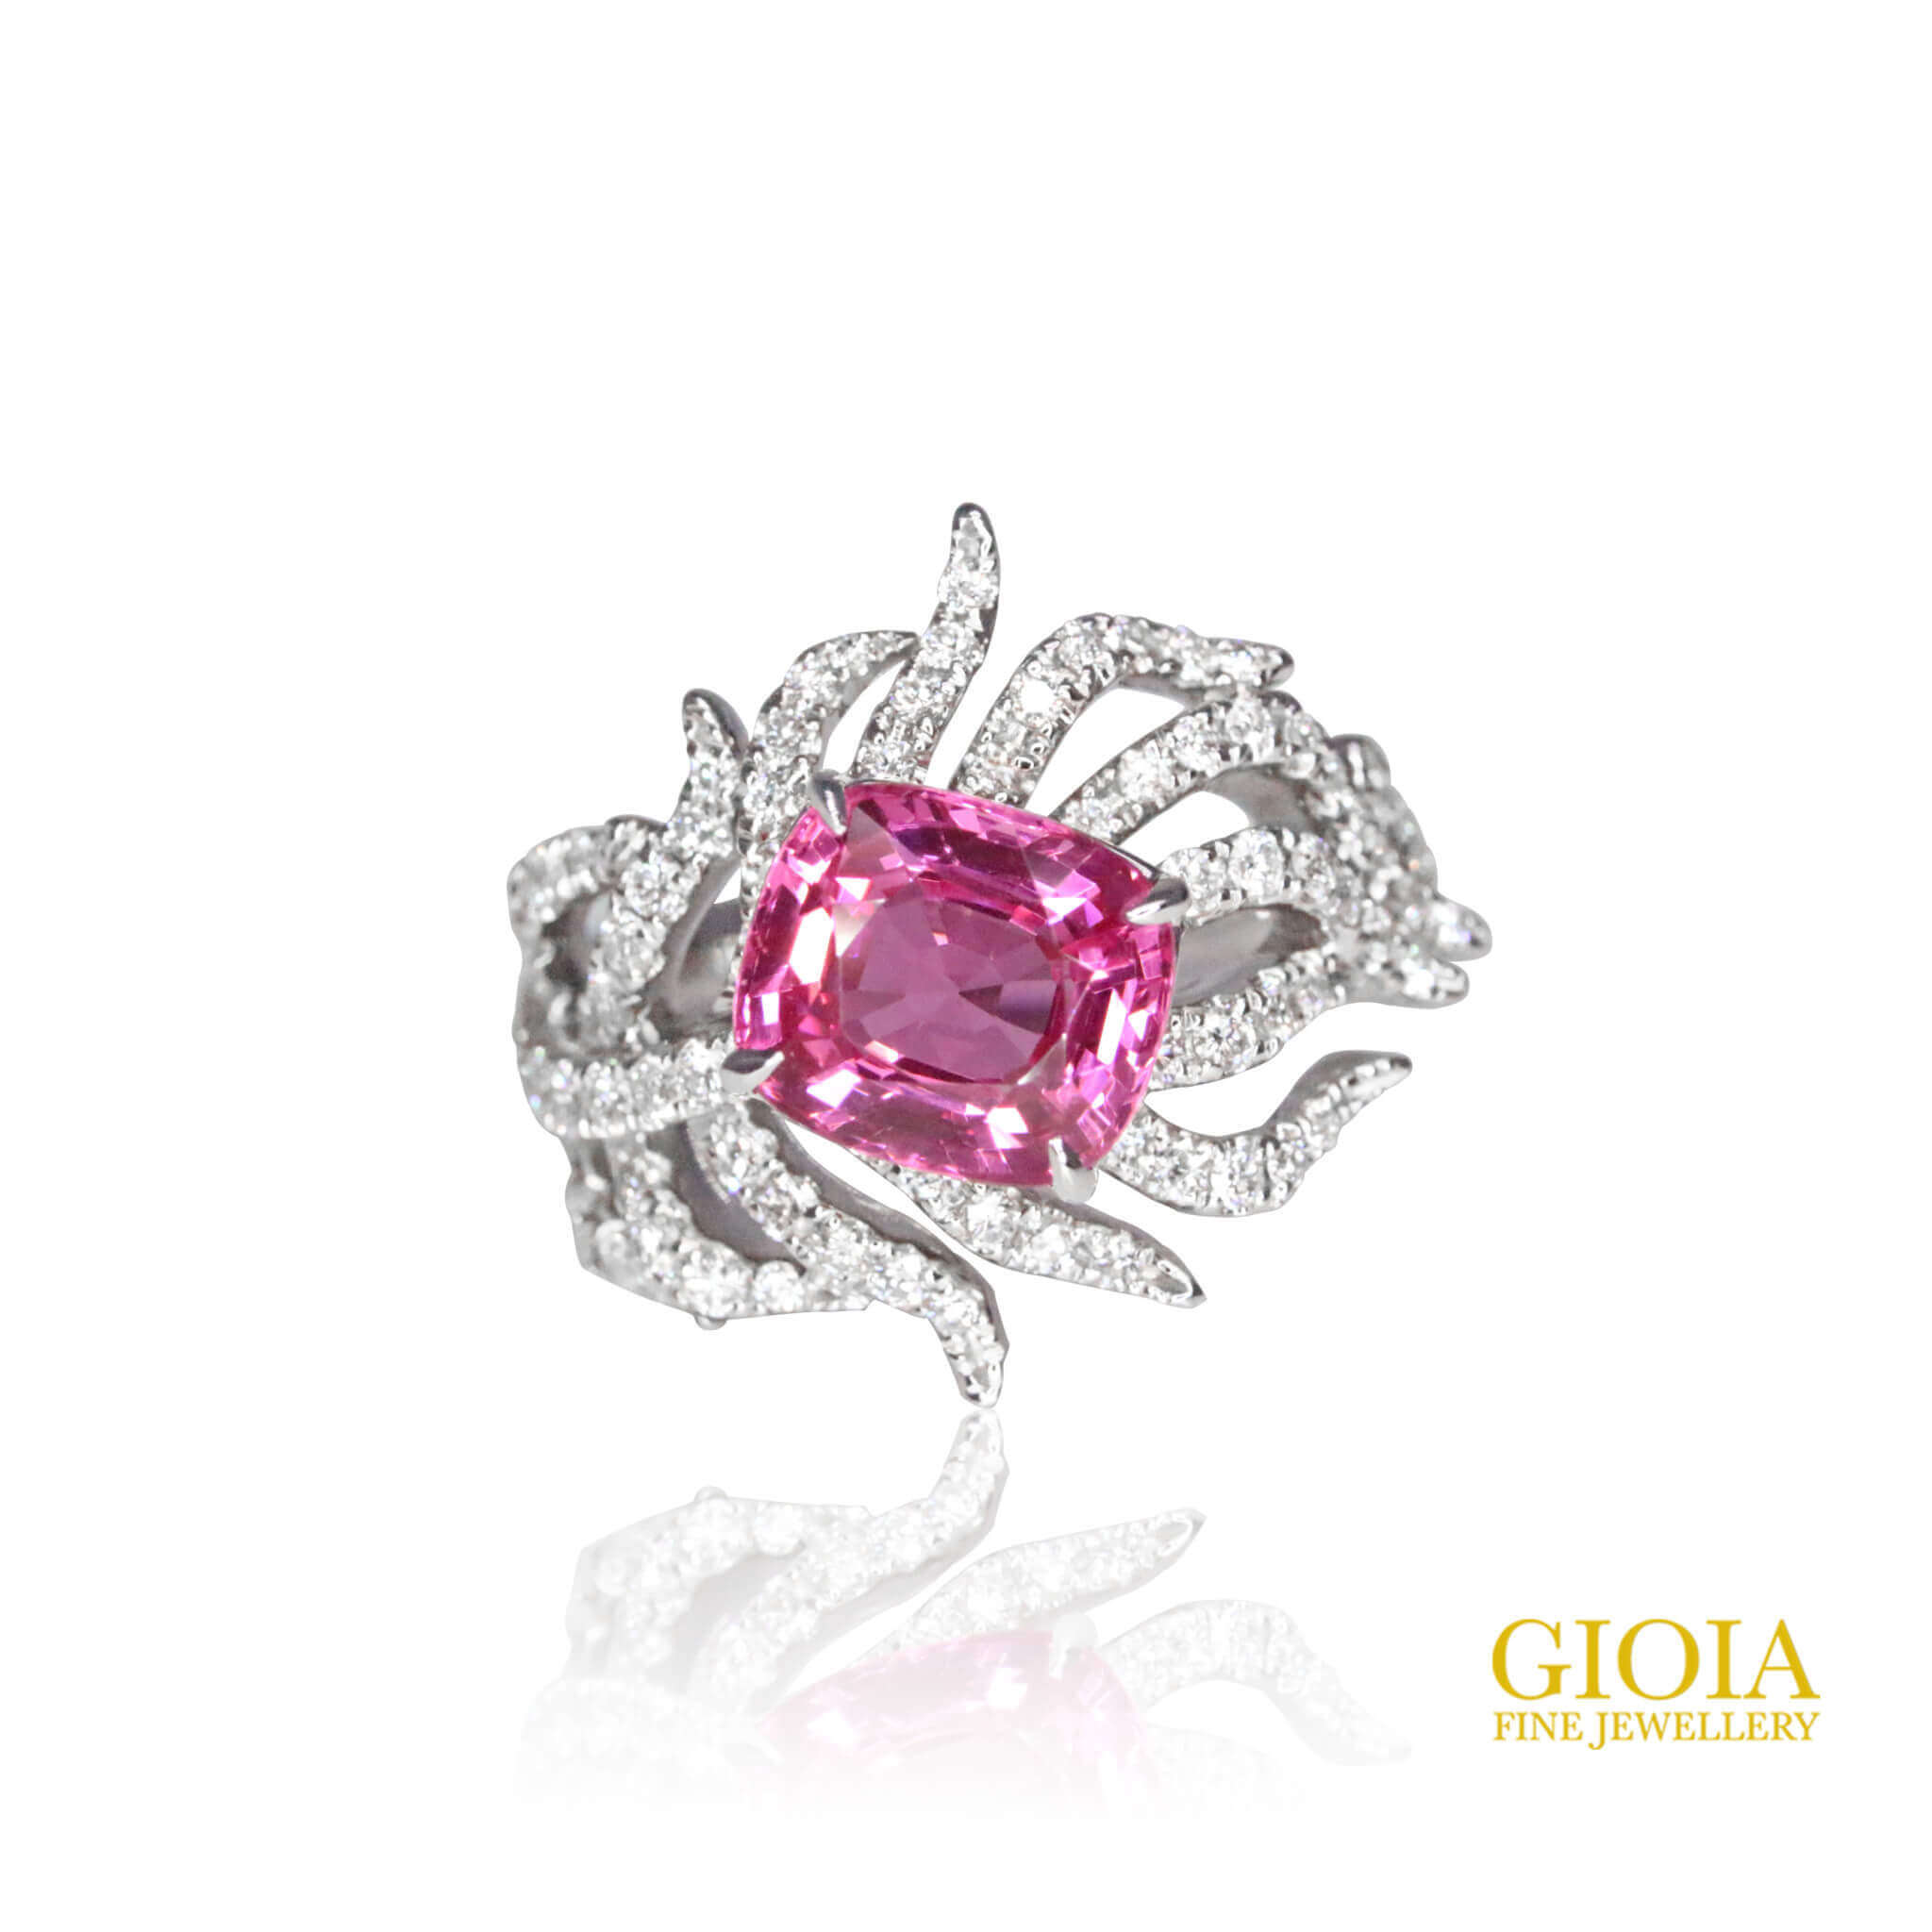 Customised Pink Spinel for engagement ring